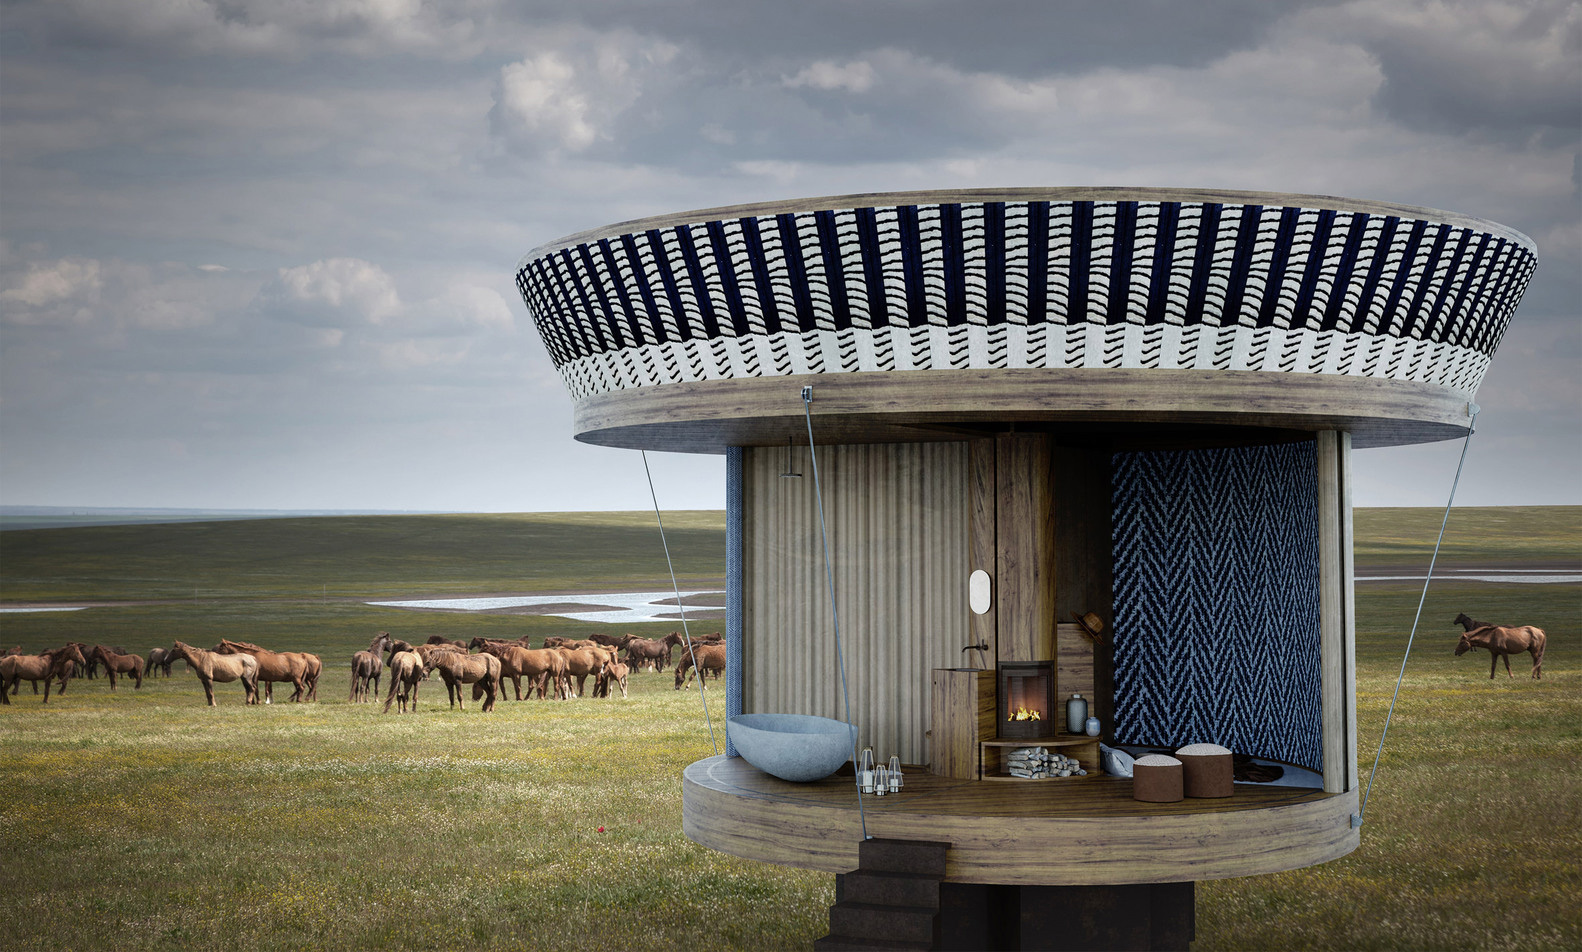 Casa Ojalá is reminiscent of a yurt thanks to its fabric walls and sliding canopy